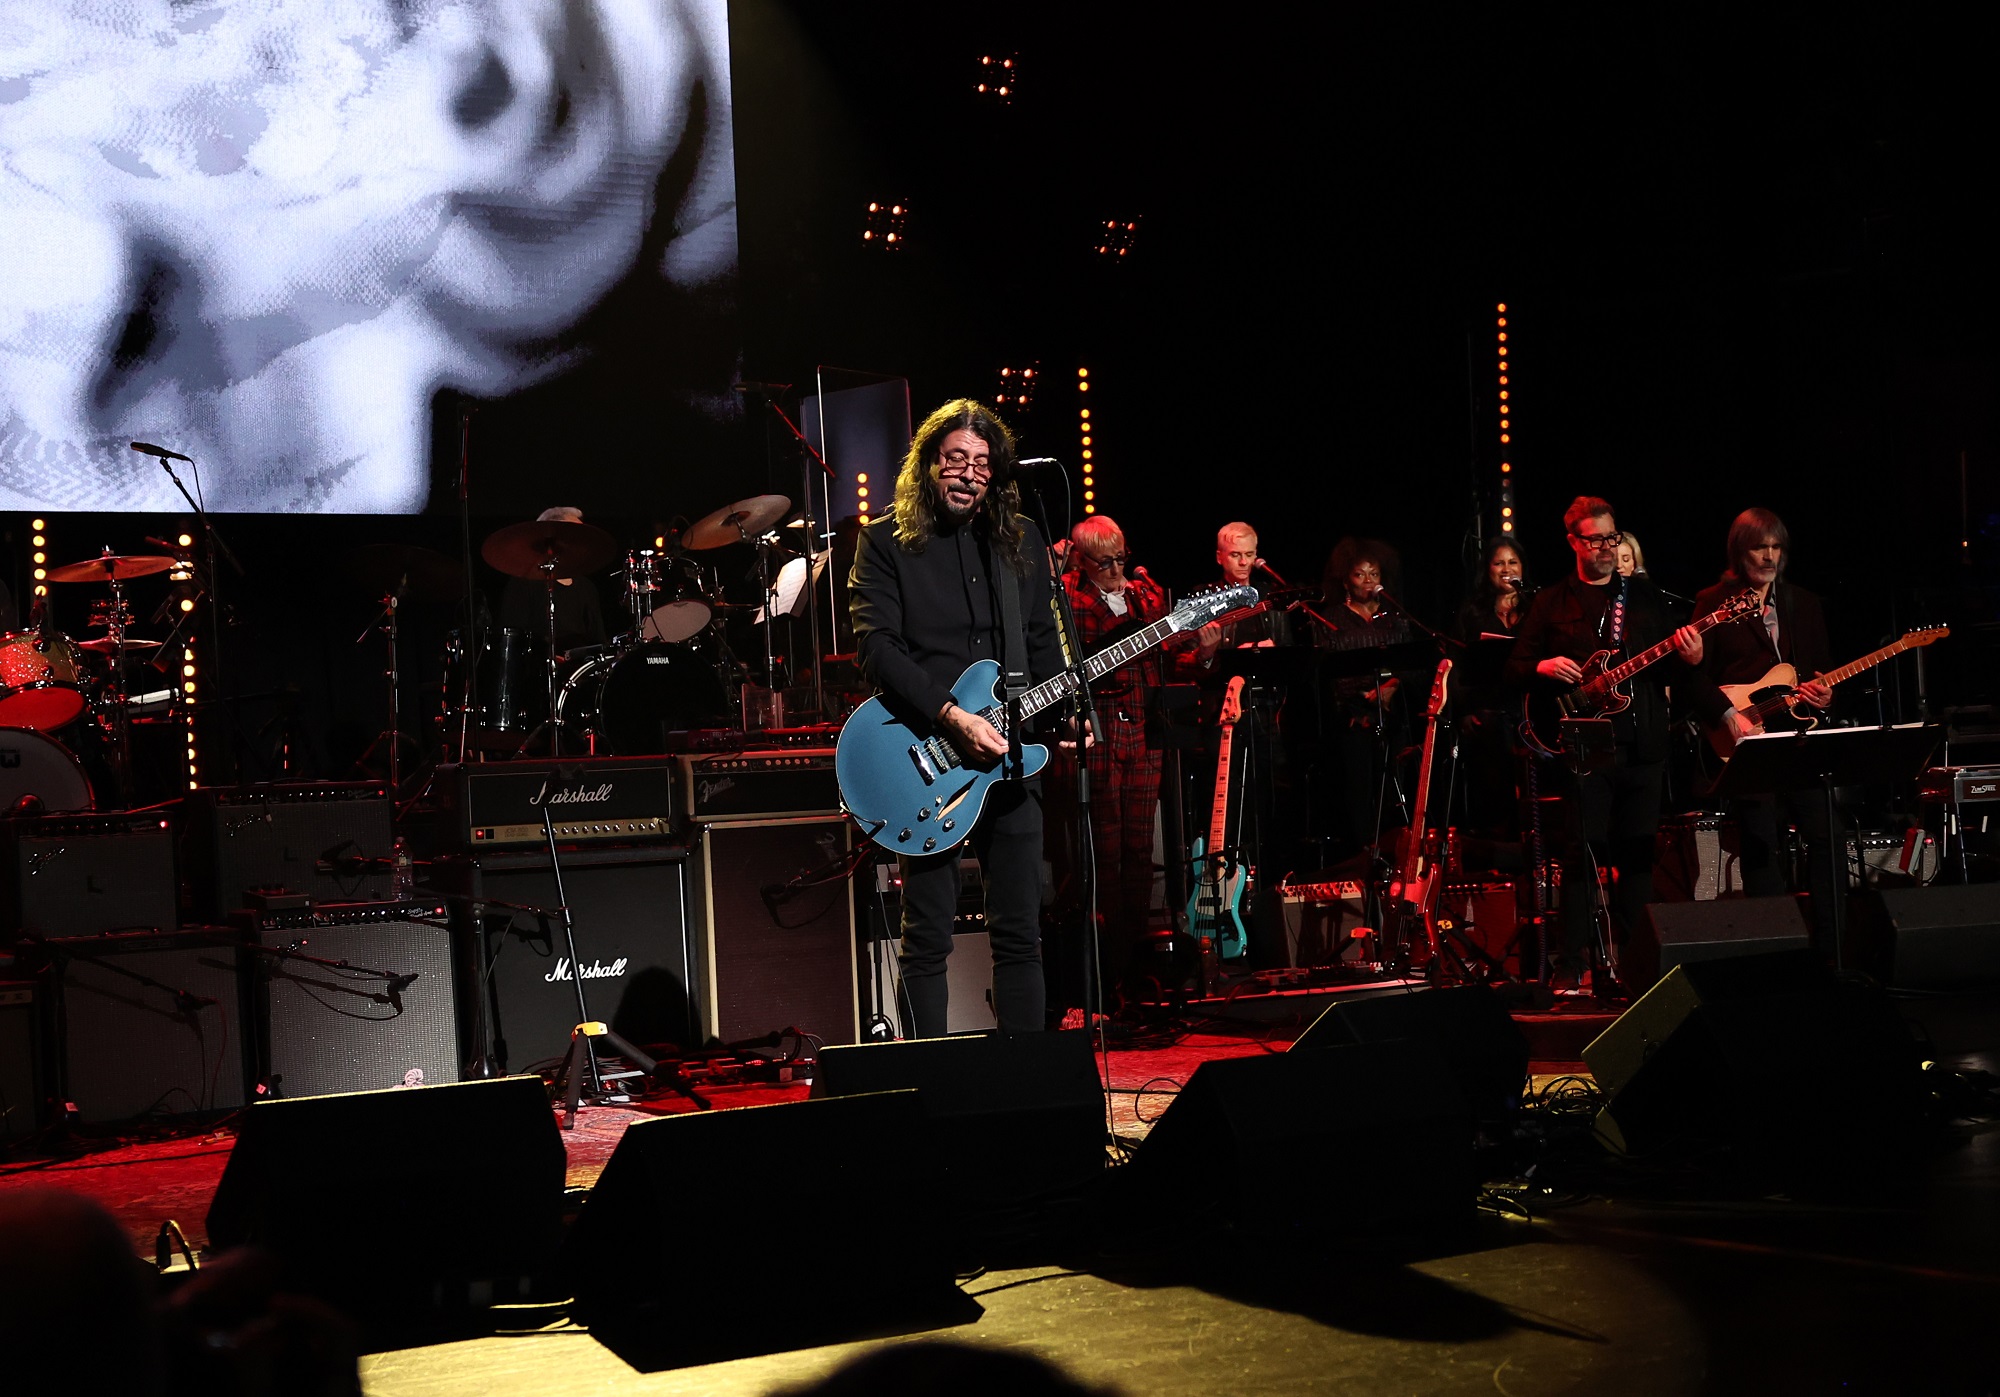 Dave Grohl, Don Felder & More Stars Helped Raise $3.8 Million for Charity at Love Rocks NYC Concert